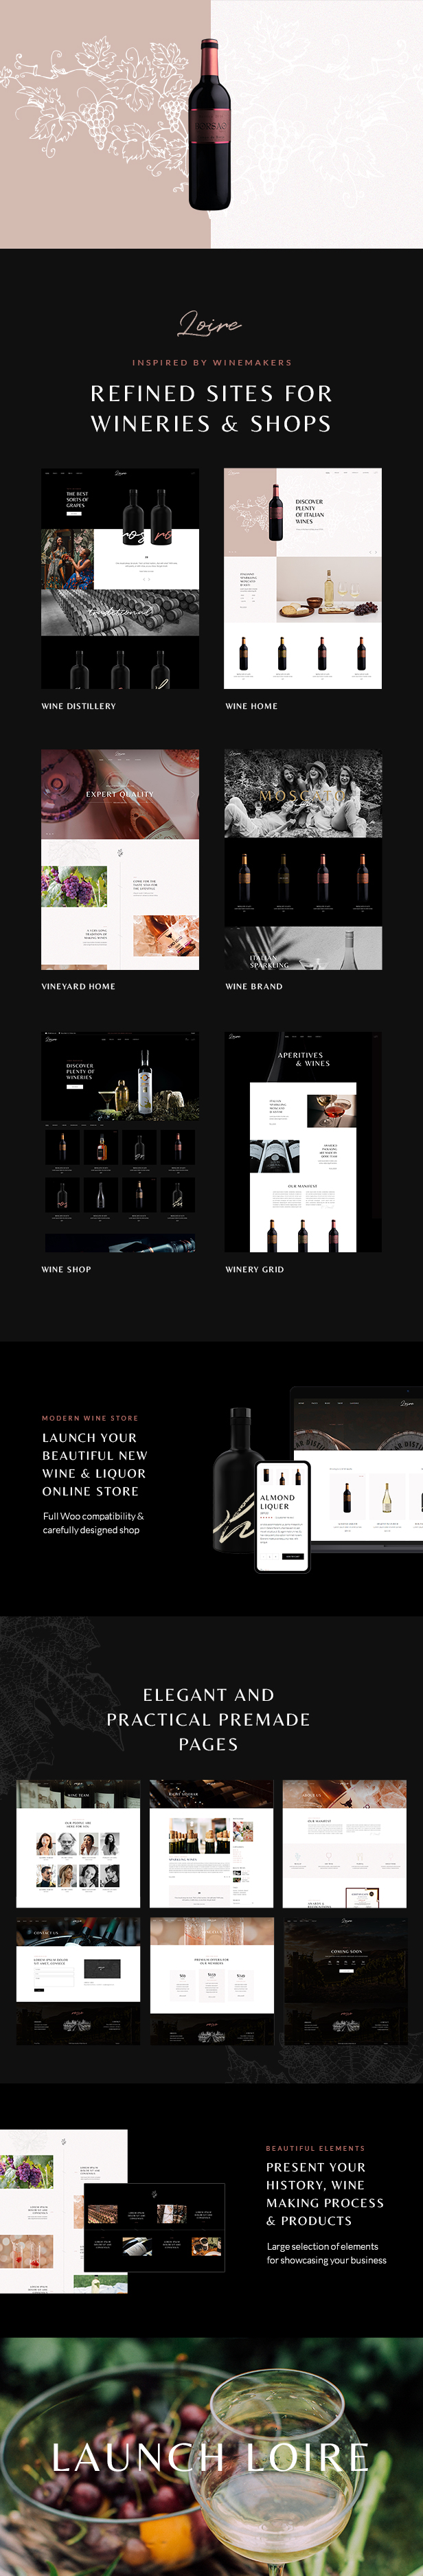 Loire - Winery and Wine Store Theme - 2